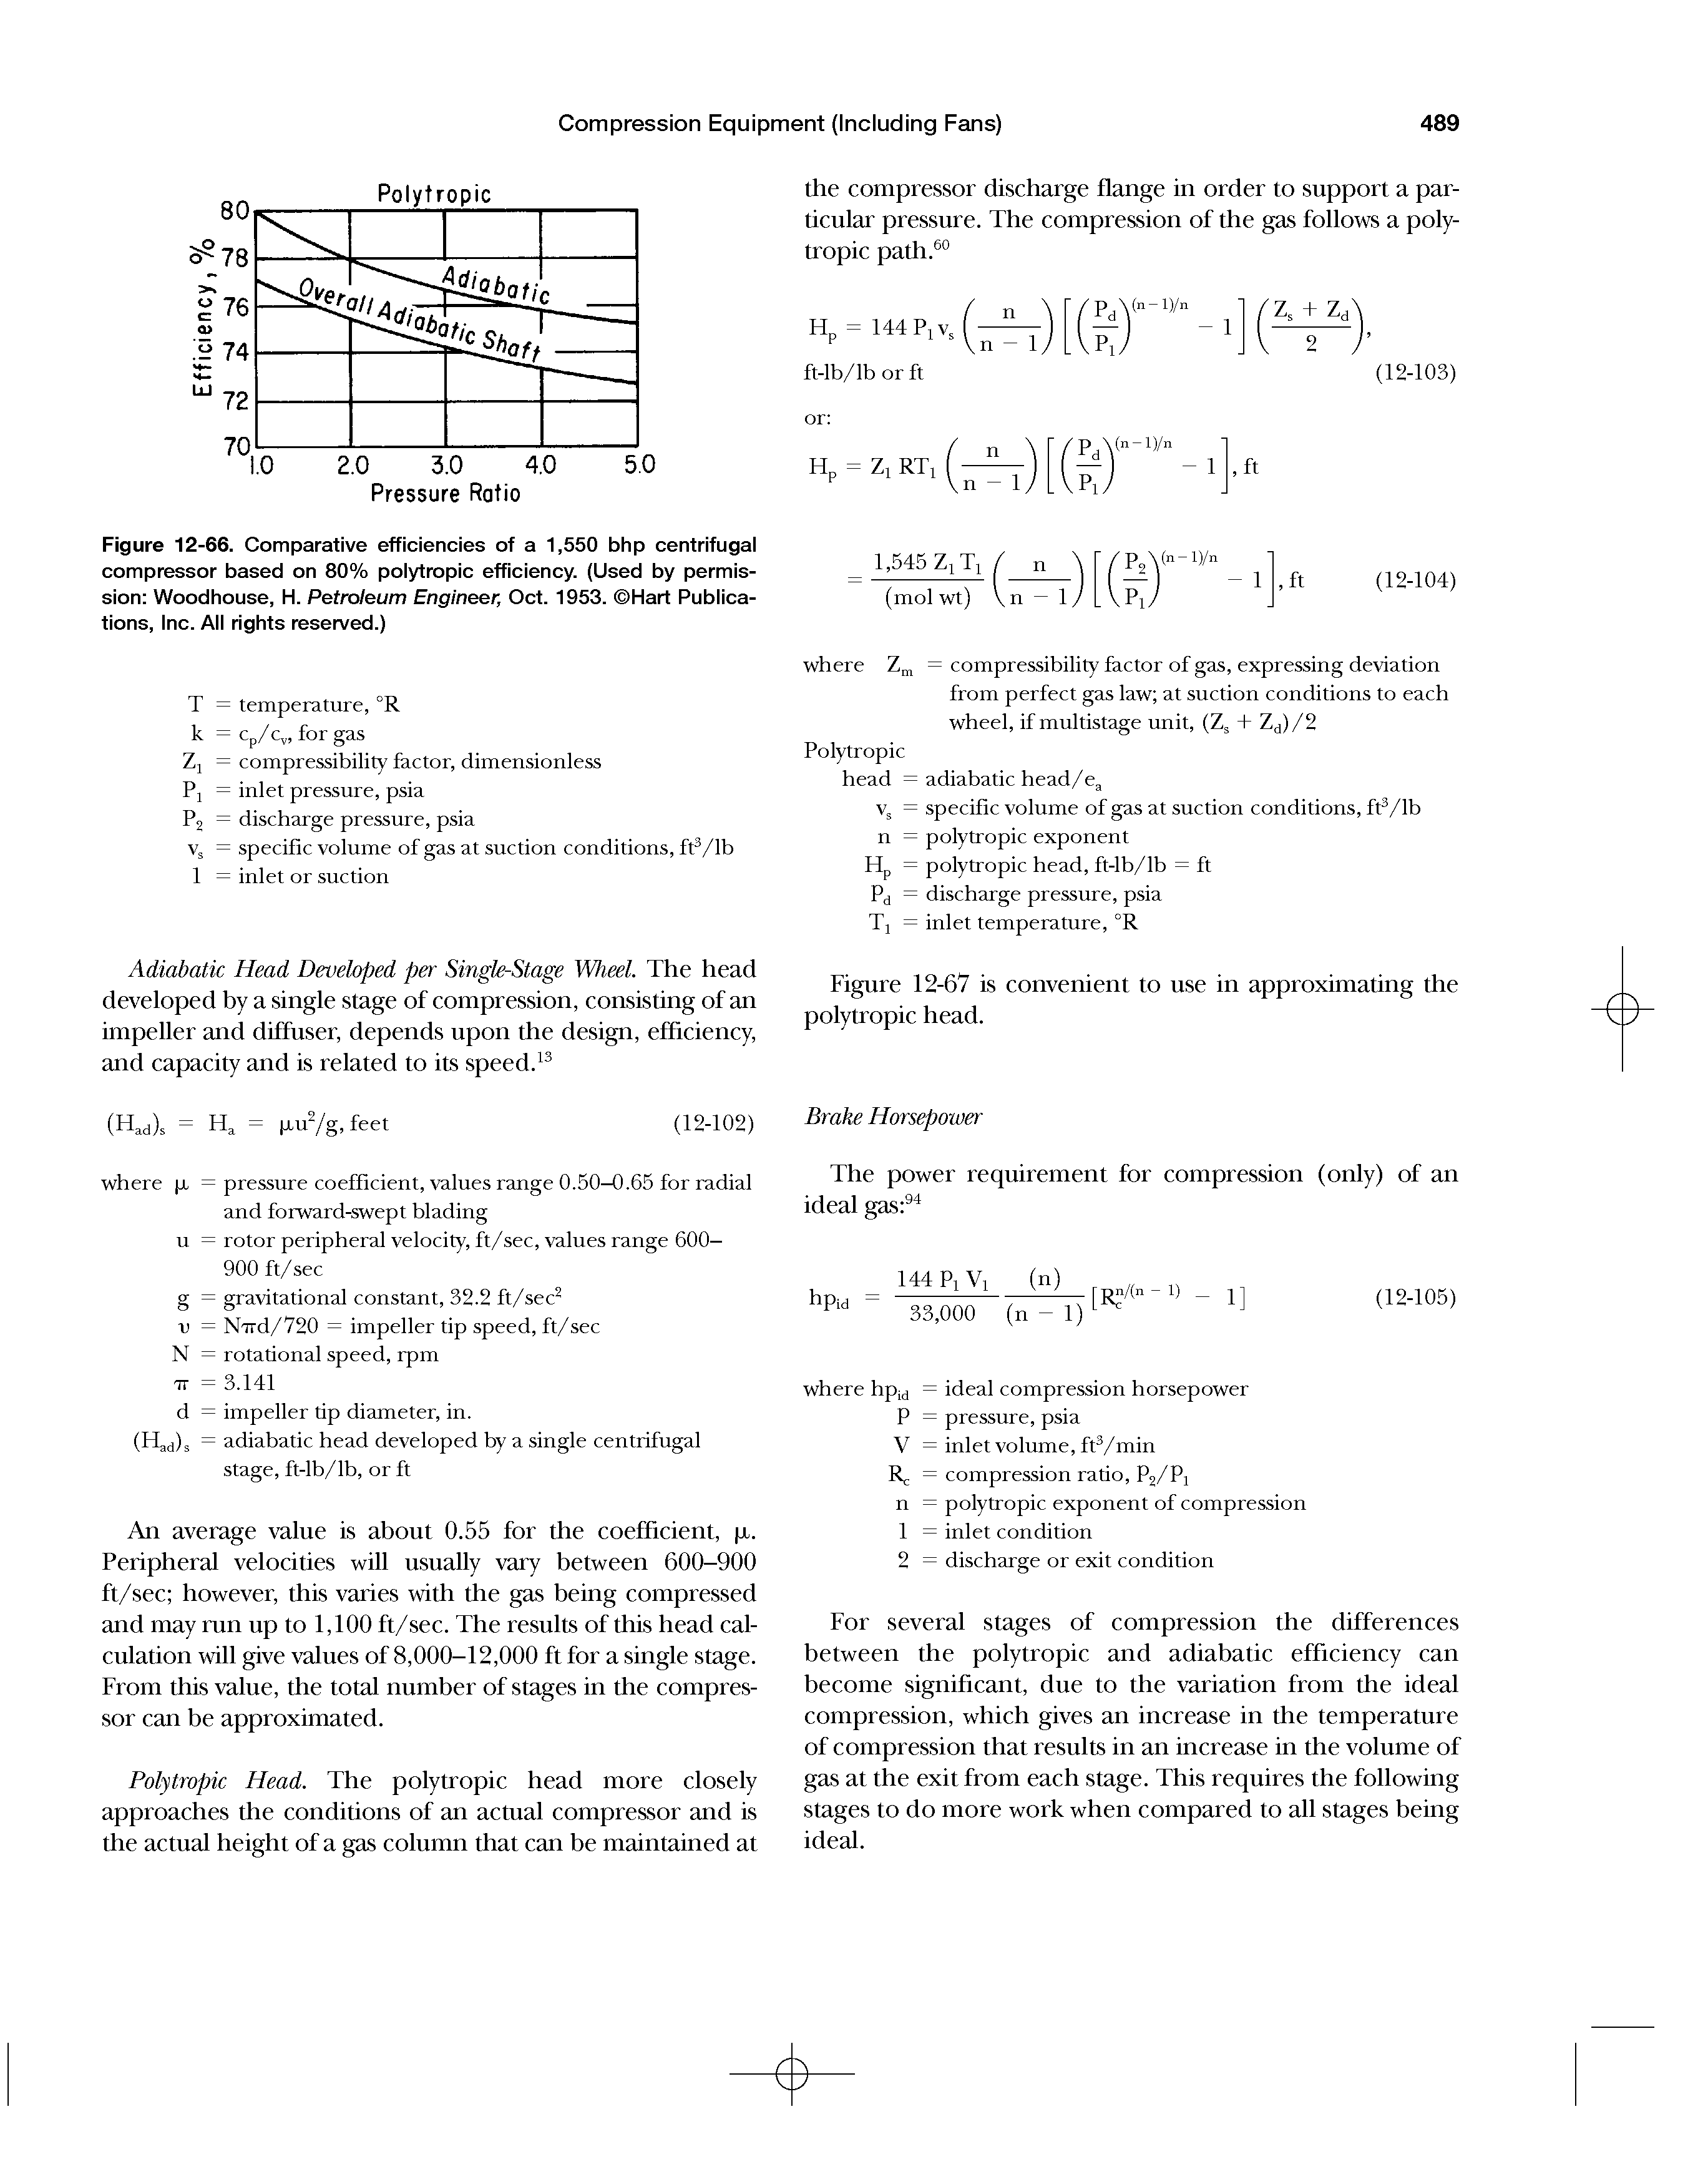 Figure 12-66. Comparative efficiencies of a 1,550 bhp centrifugal compressor based on 80% polytropic efficiency. (Used by permission Woodhouse, H. Petroleum Engineer, Oct. 1953. Hart Publications, Inc. All rights reserved.)...